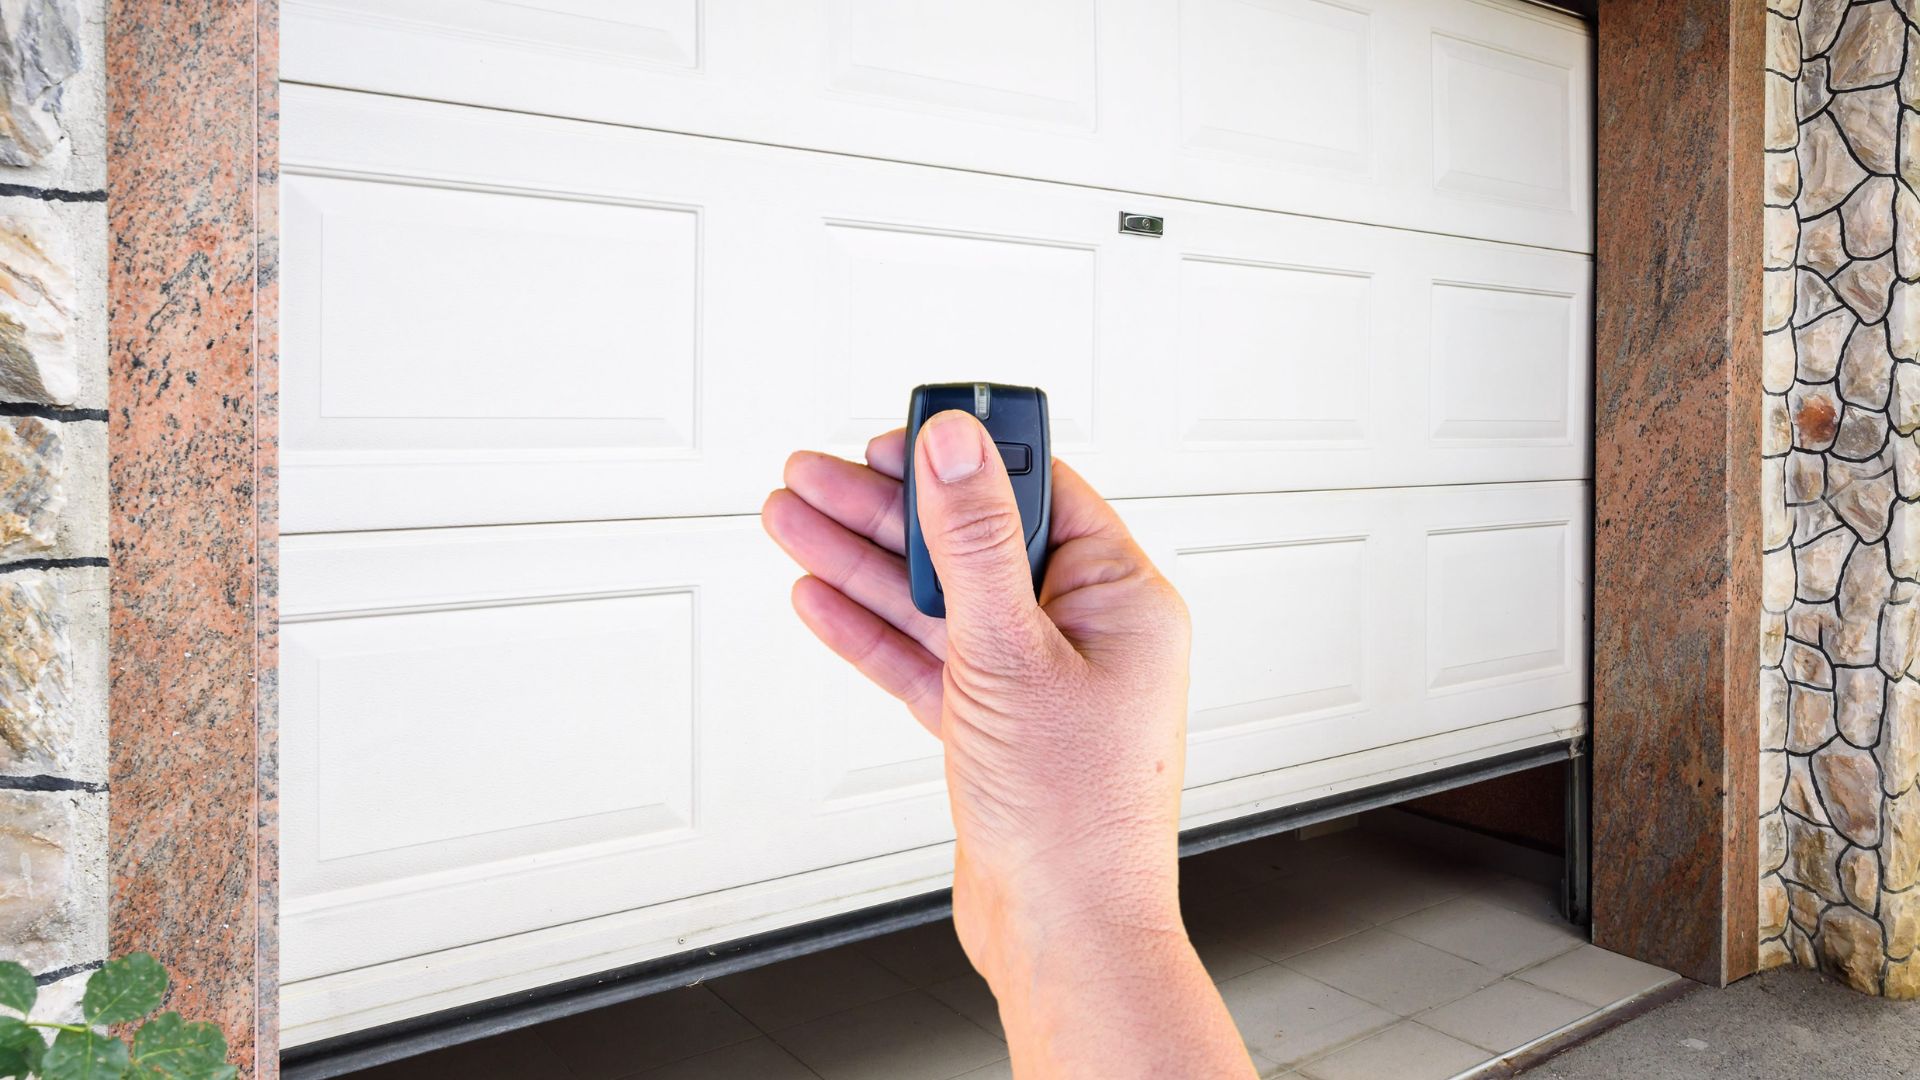 A person operating an automatic garage door with a remote.